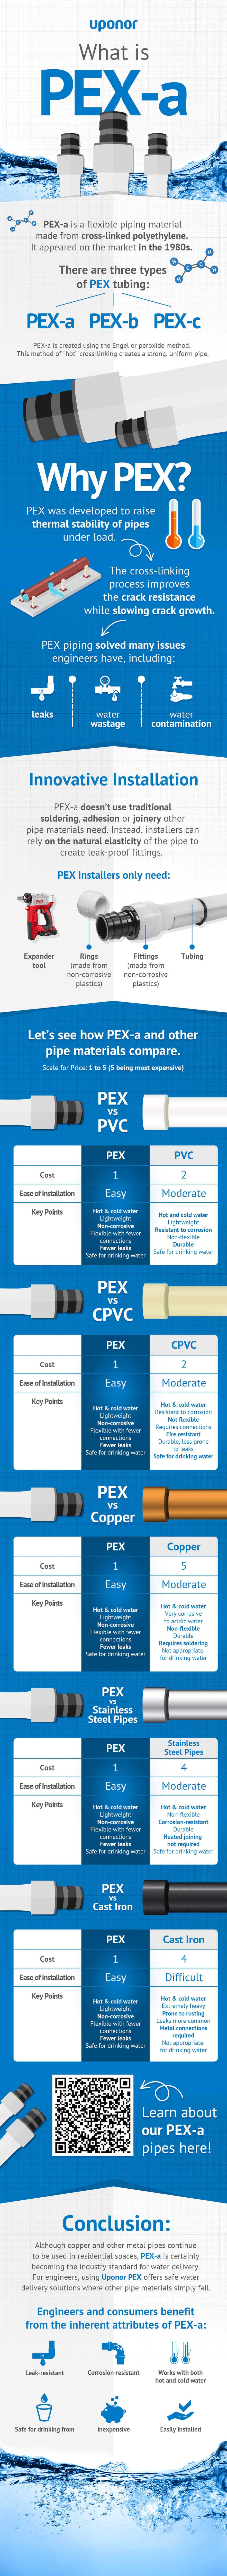 Best Pipes For Plumbing? PEX-a Pipes vs The Rest